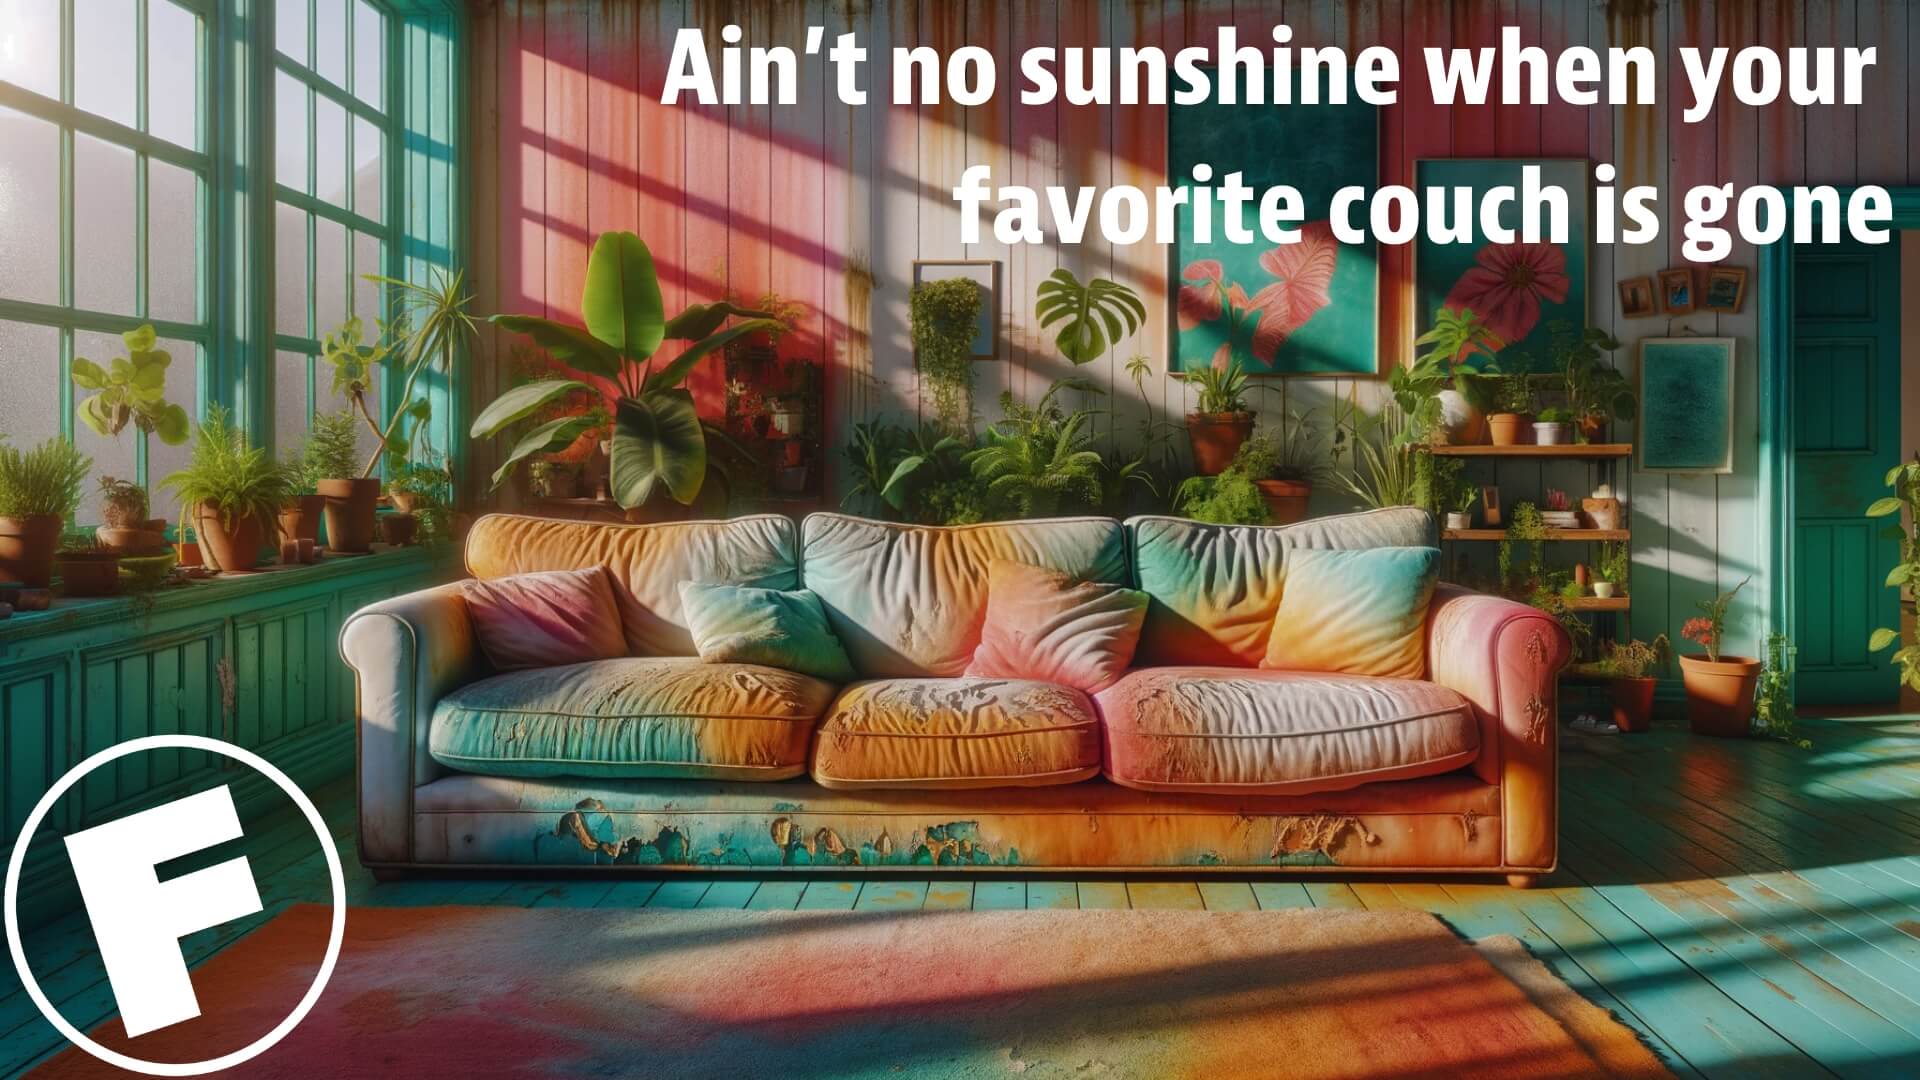 a colorful couch suffering the consequences of being in direct sunlight too often